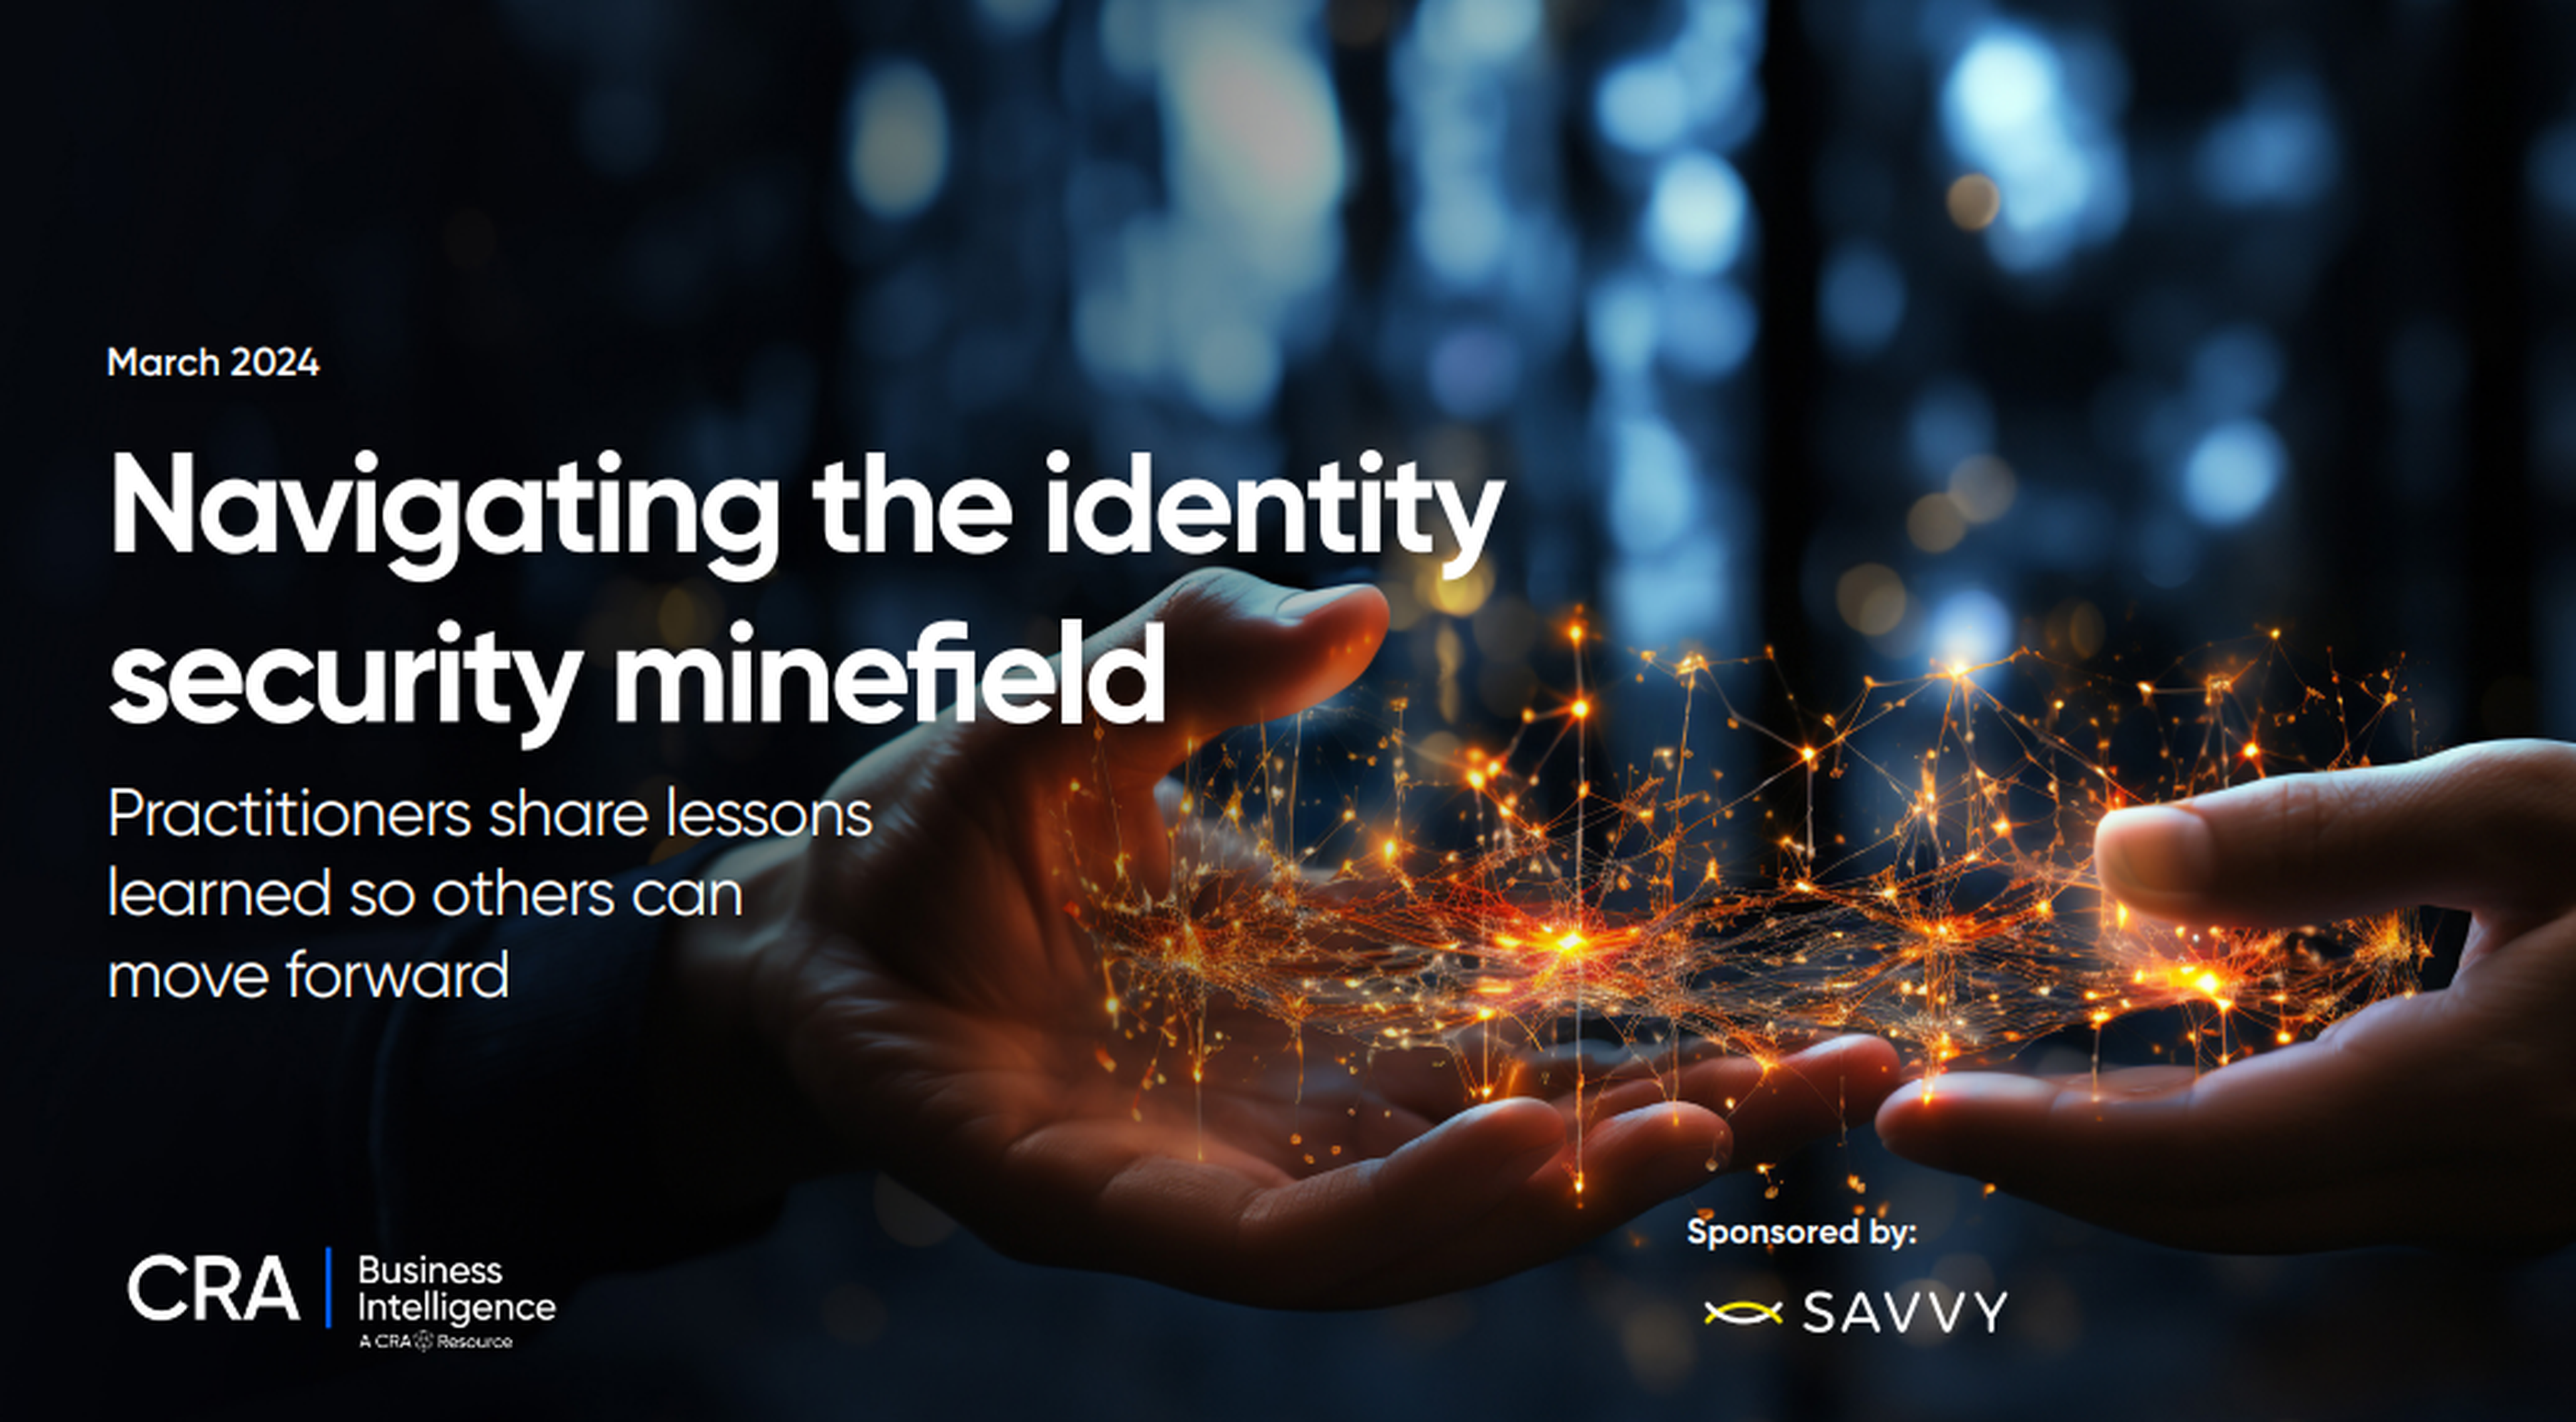 Navigating the identity security minefield